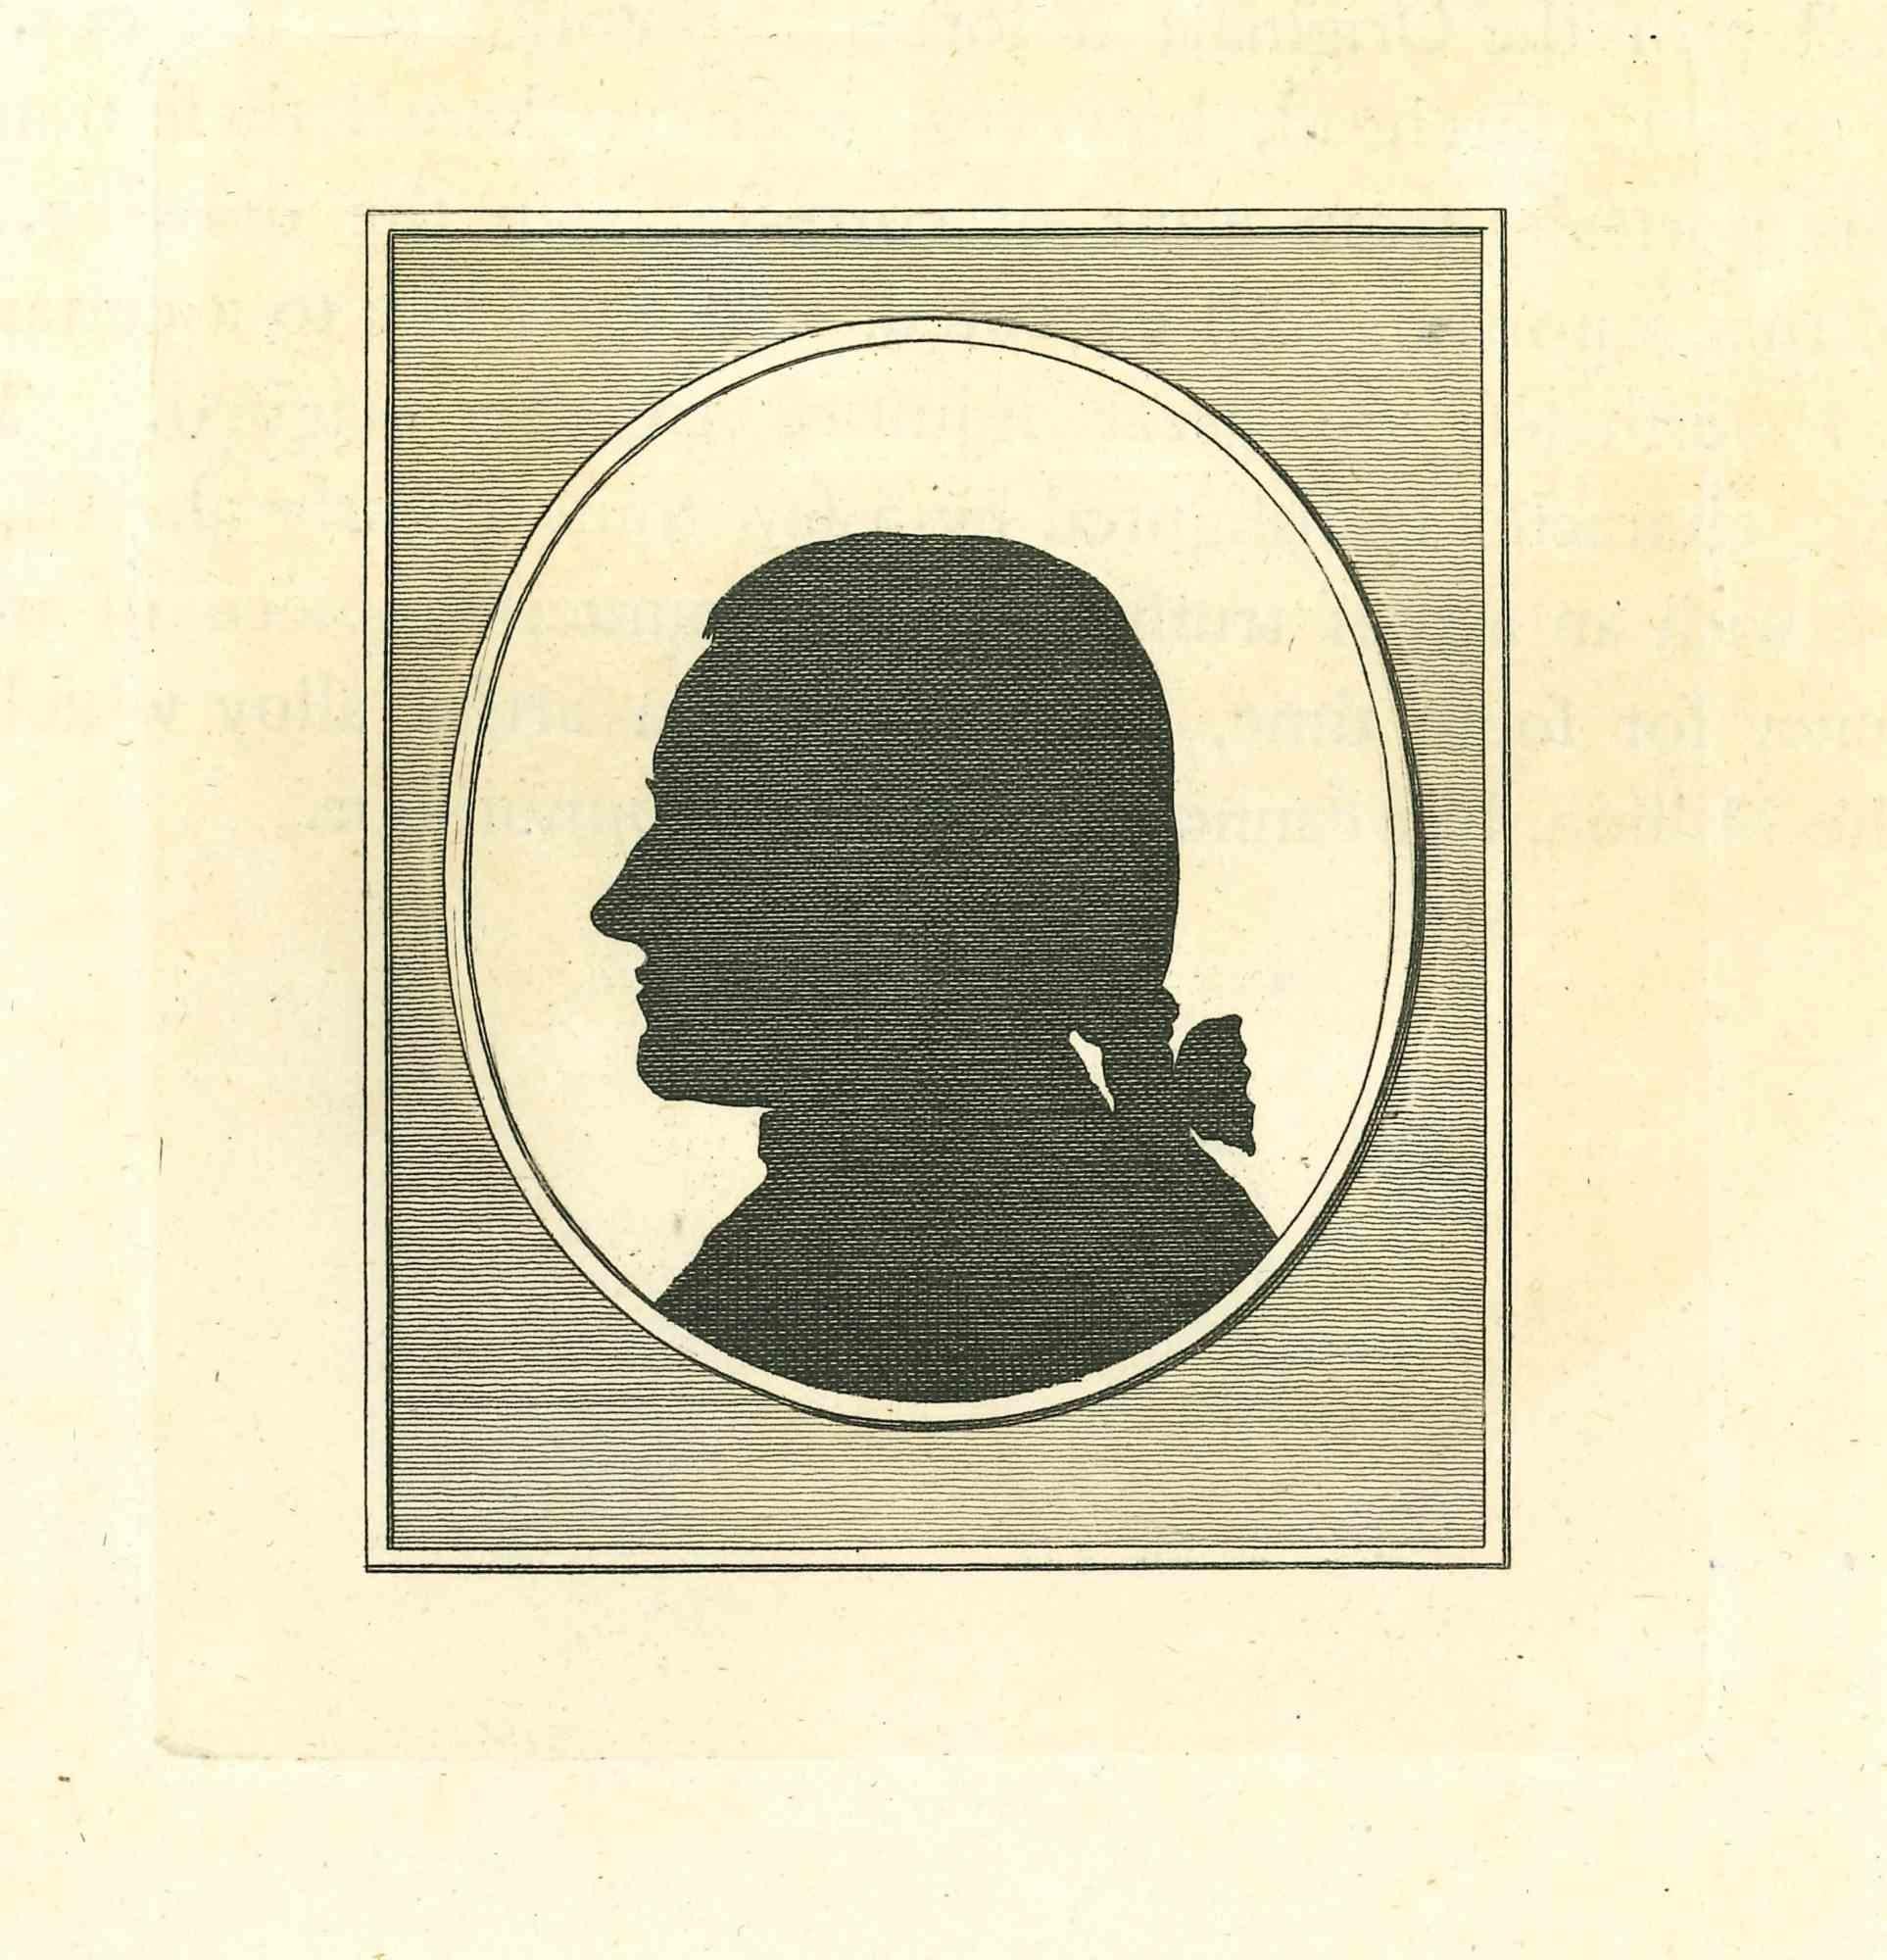 The Profile is an original etching artwork realized by Thomas Holloway for Johann Caspar Lavater's "Essays on Physiognomy, Designed to Promote the Knowledge and the Love of Mankind", London, Bensley, 1810. 

With the script on the rear.

Good